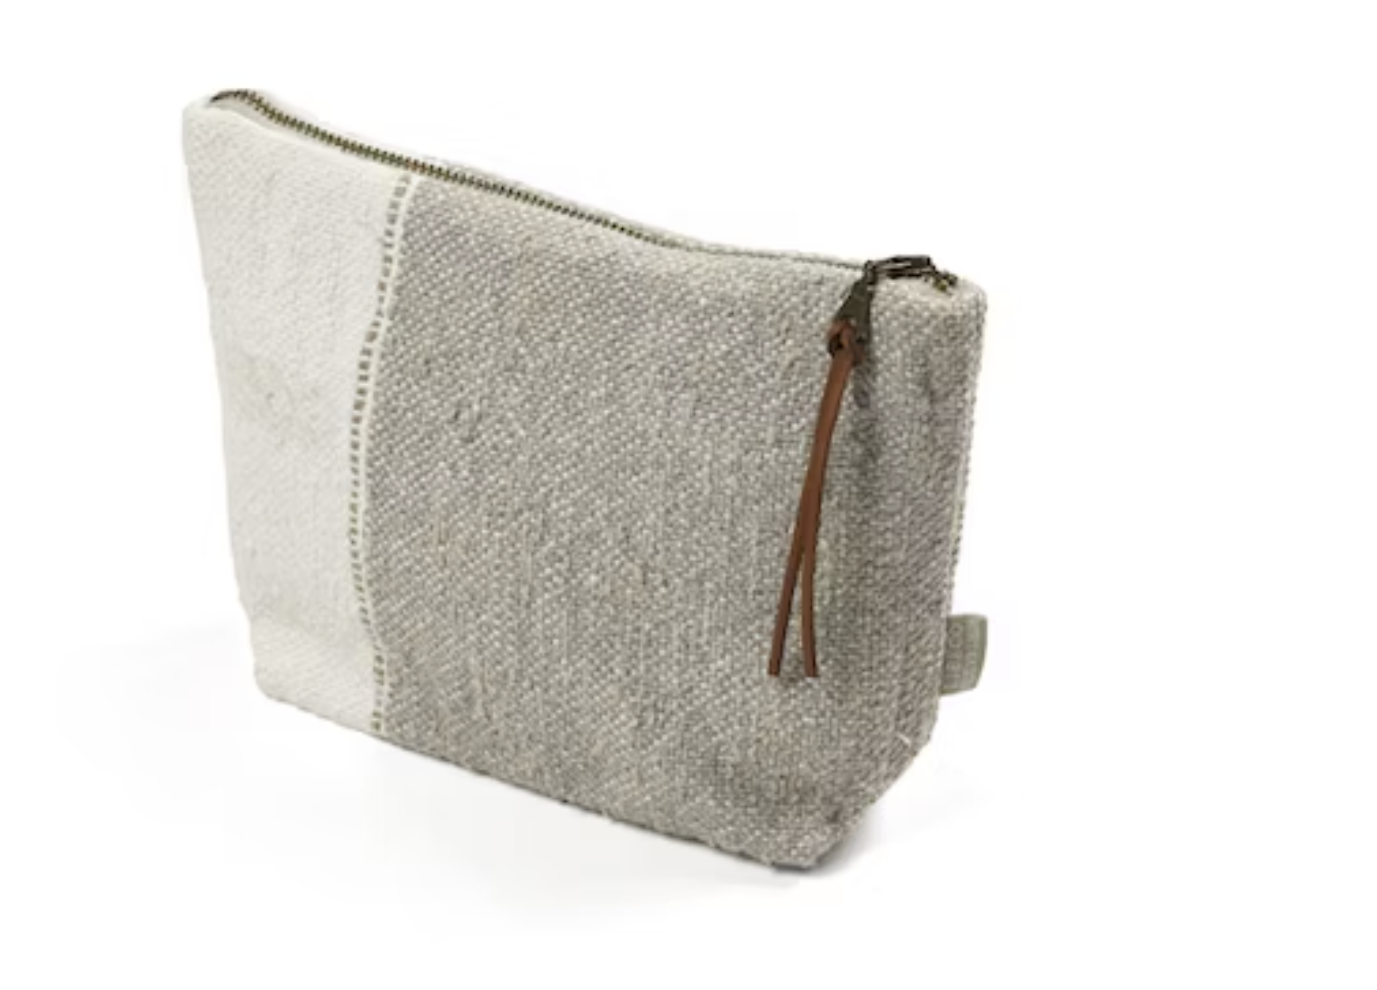 CHARLOTTE POUCH - Oyster Stripe $61.00